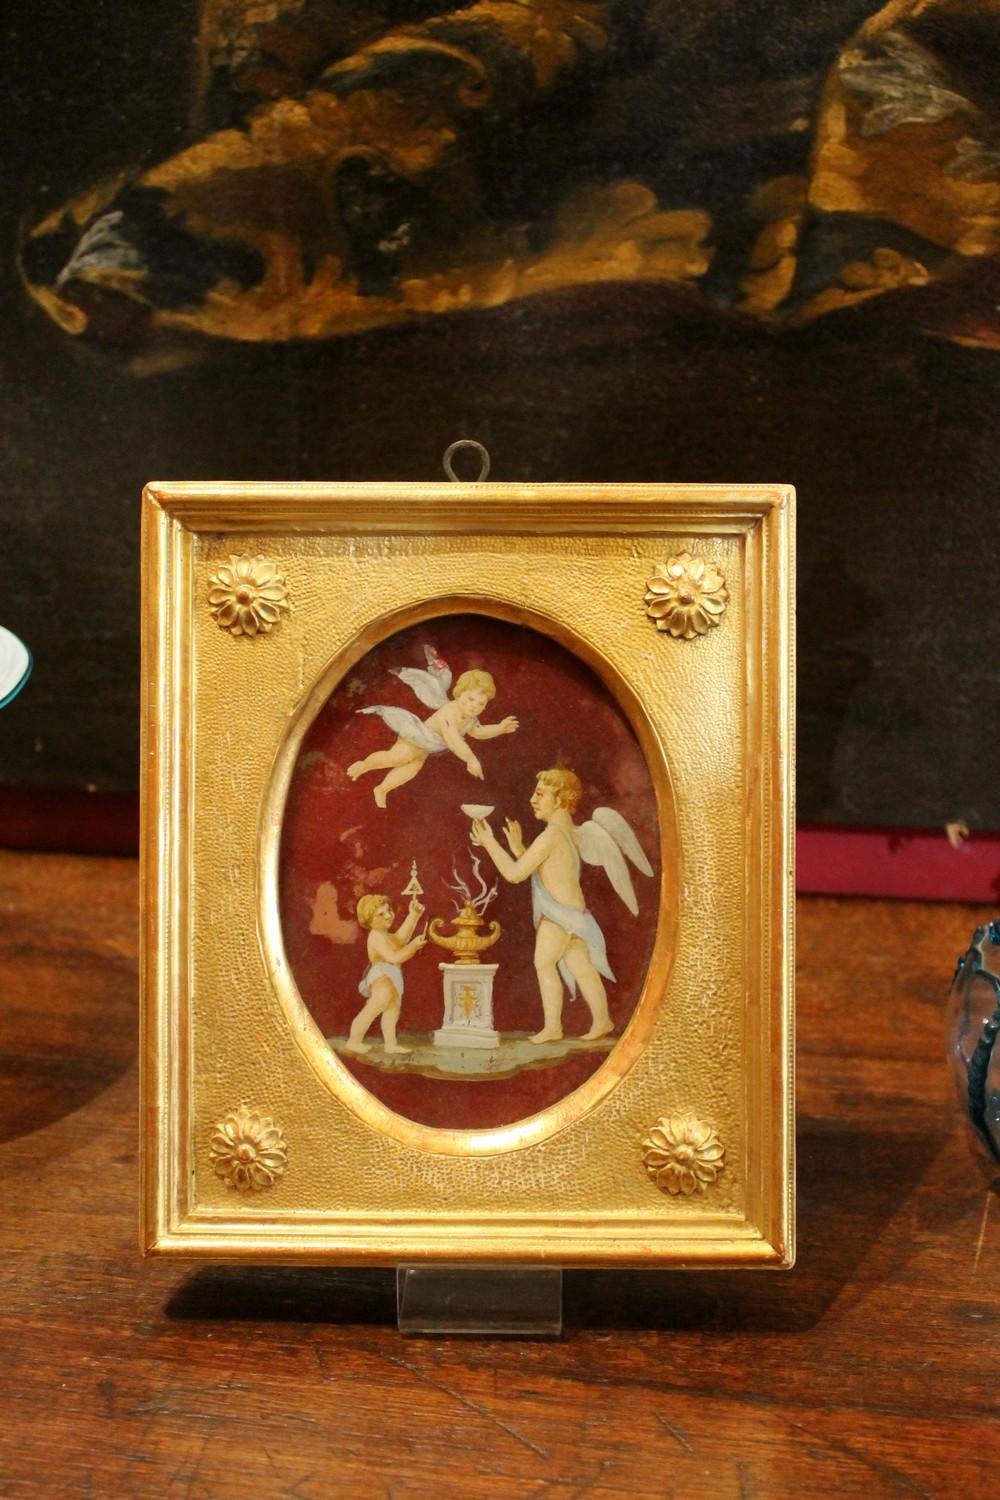 Italian Neoclassical Style Oil Painting on Oval Glass with Putti iGiltwood Frame - Brown Figurative Painting by Unknown